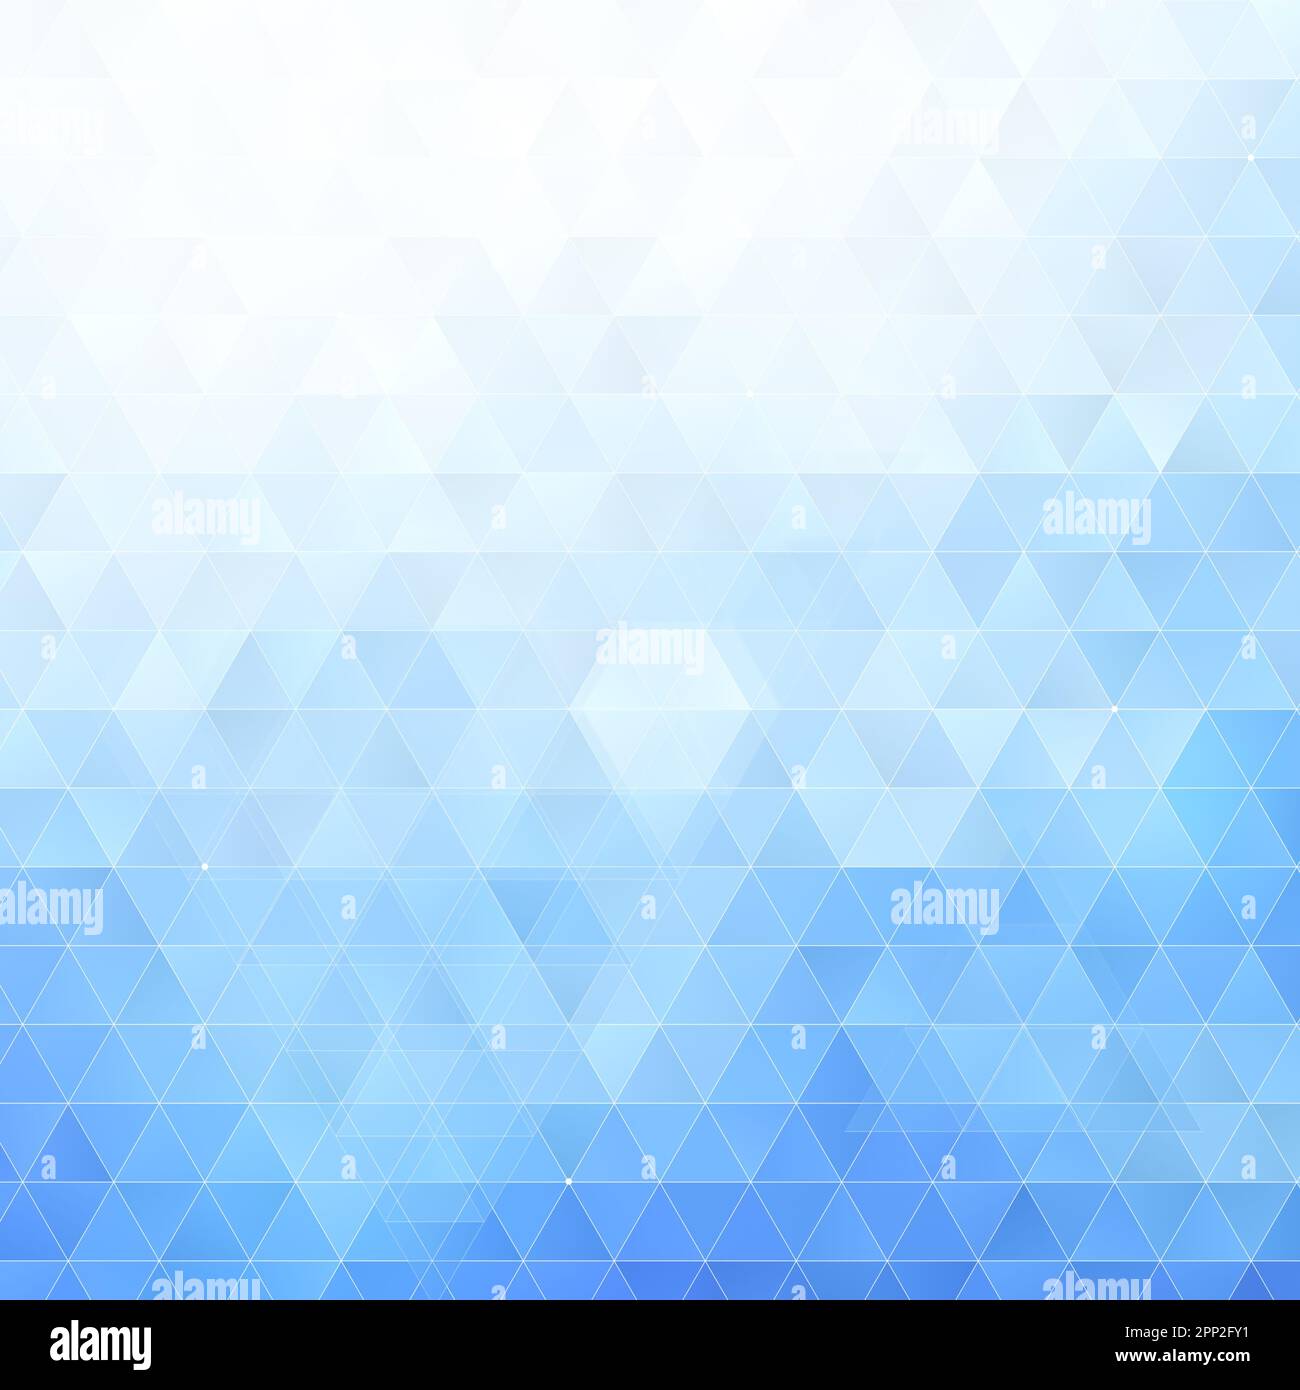 Abstract background made of many white, light blue & blue triangles. High resolution full frame geometric triangular shape background with copy space. Stock Photo